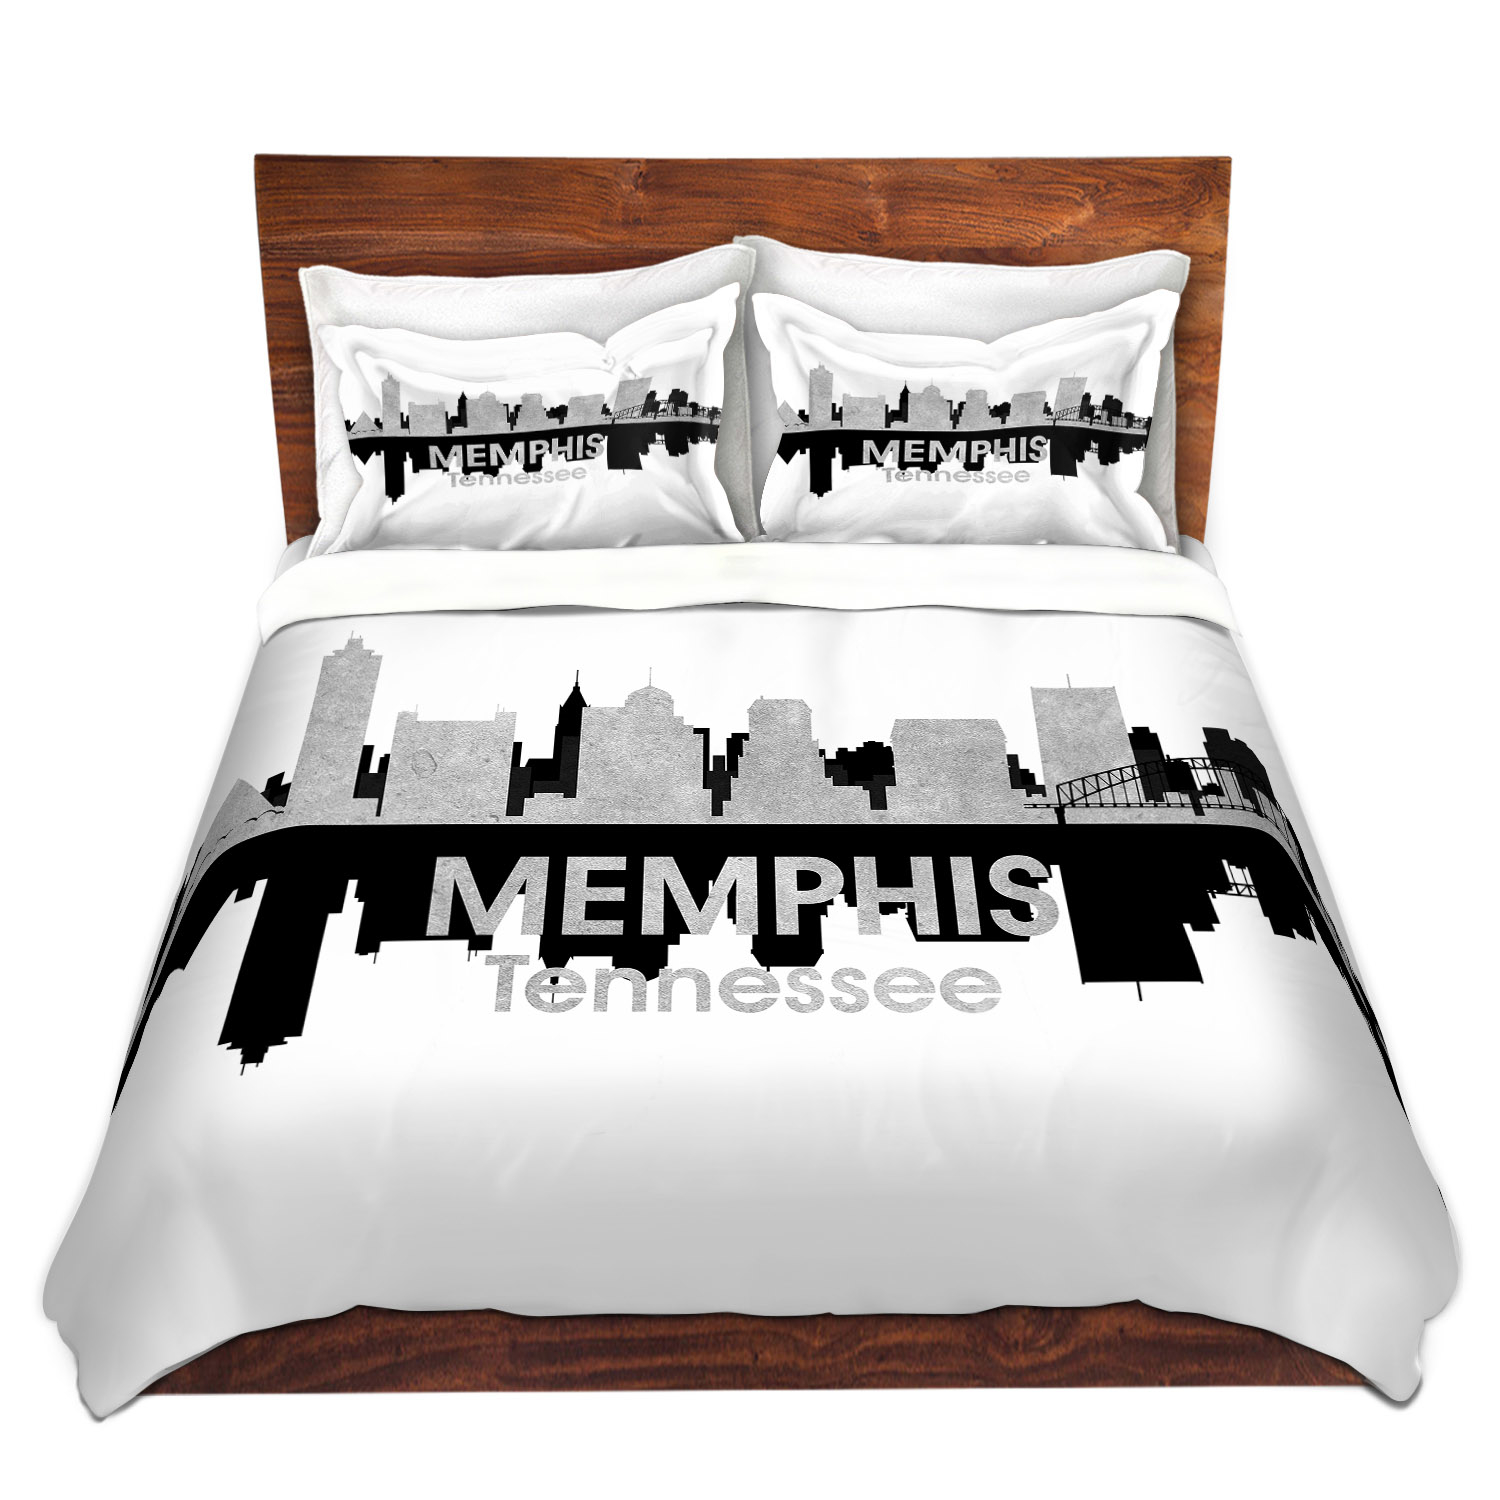 Dianoche Microfiber Duvet Covers By Angelina Vick - City Iv Memphis Tennessee